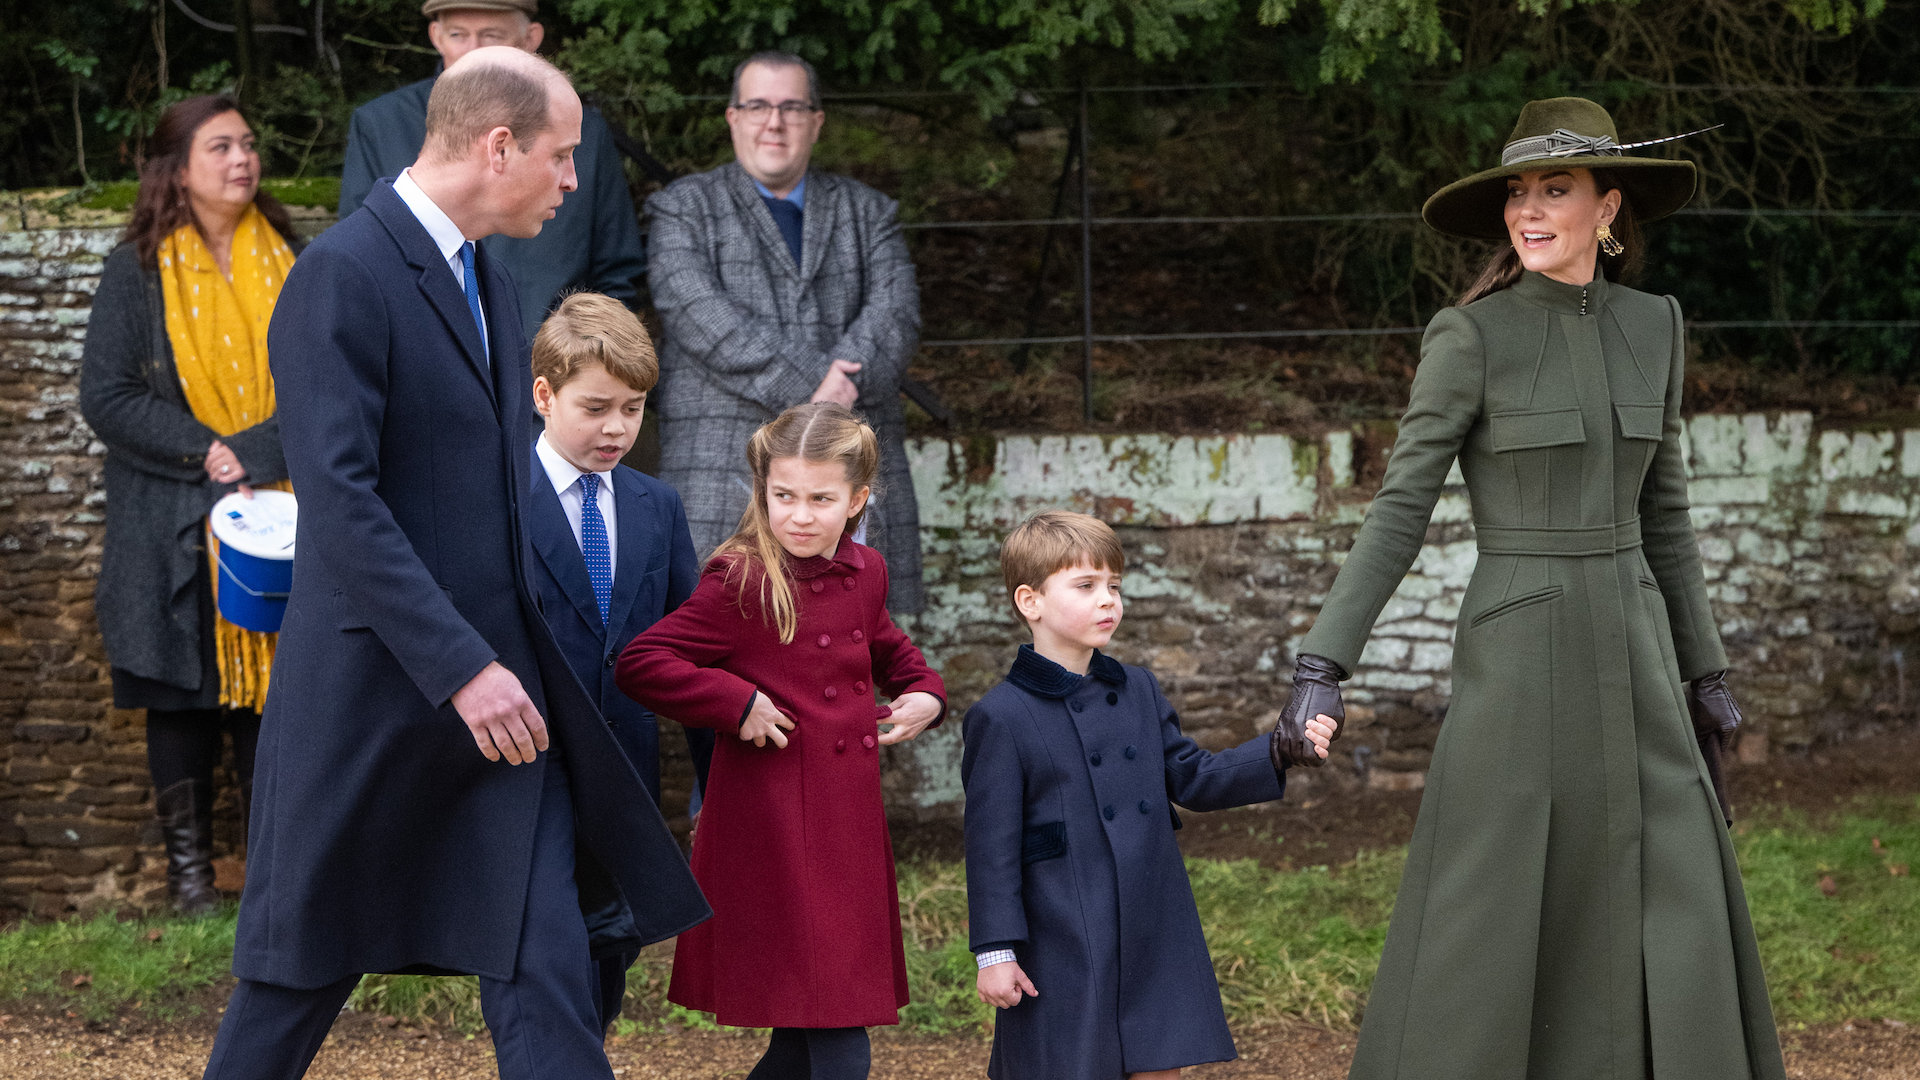 <p>                     Ahead of their appearance at Sandringham in 2021, the Cambridges had surprised fans with a portrait of the family in the ancient city of Petra, Jordan on their official Christmas card. The duchess may have been keen to show her children where she spent three years growing up in the 1980s, with her father Michael Middleton's British Airways job taking them to Amman.                   </p>